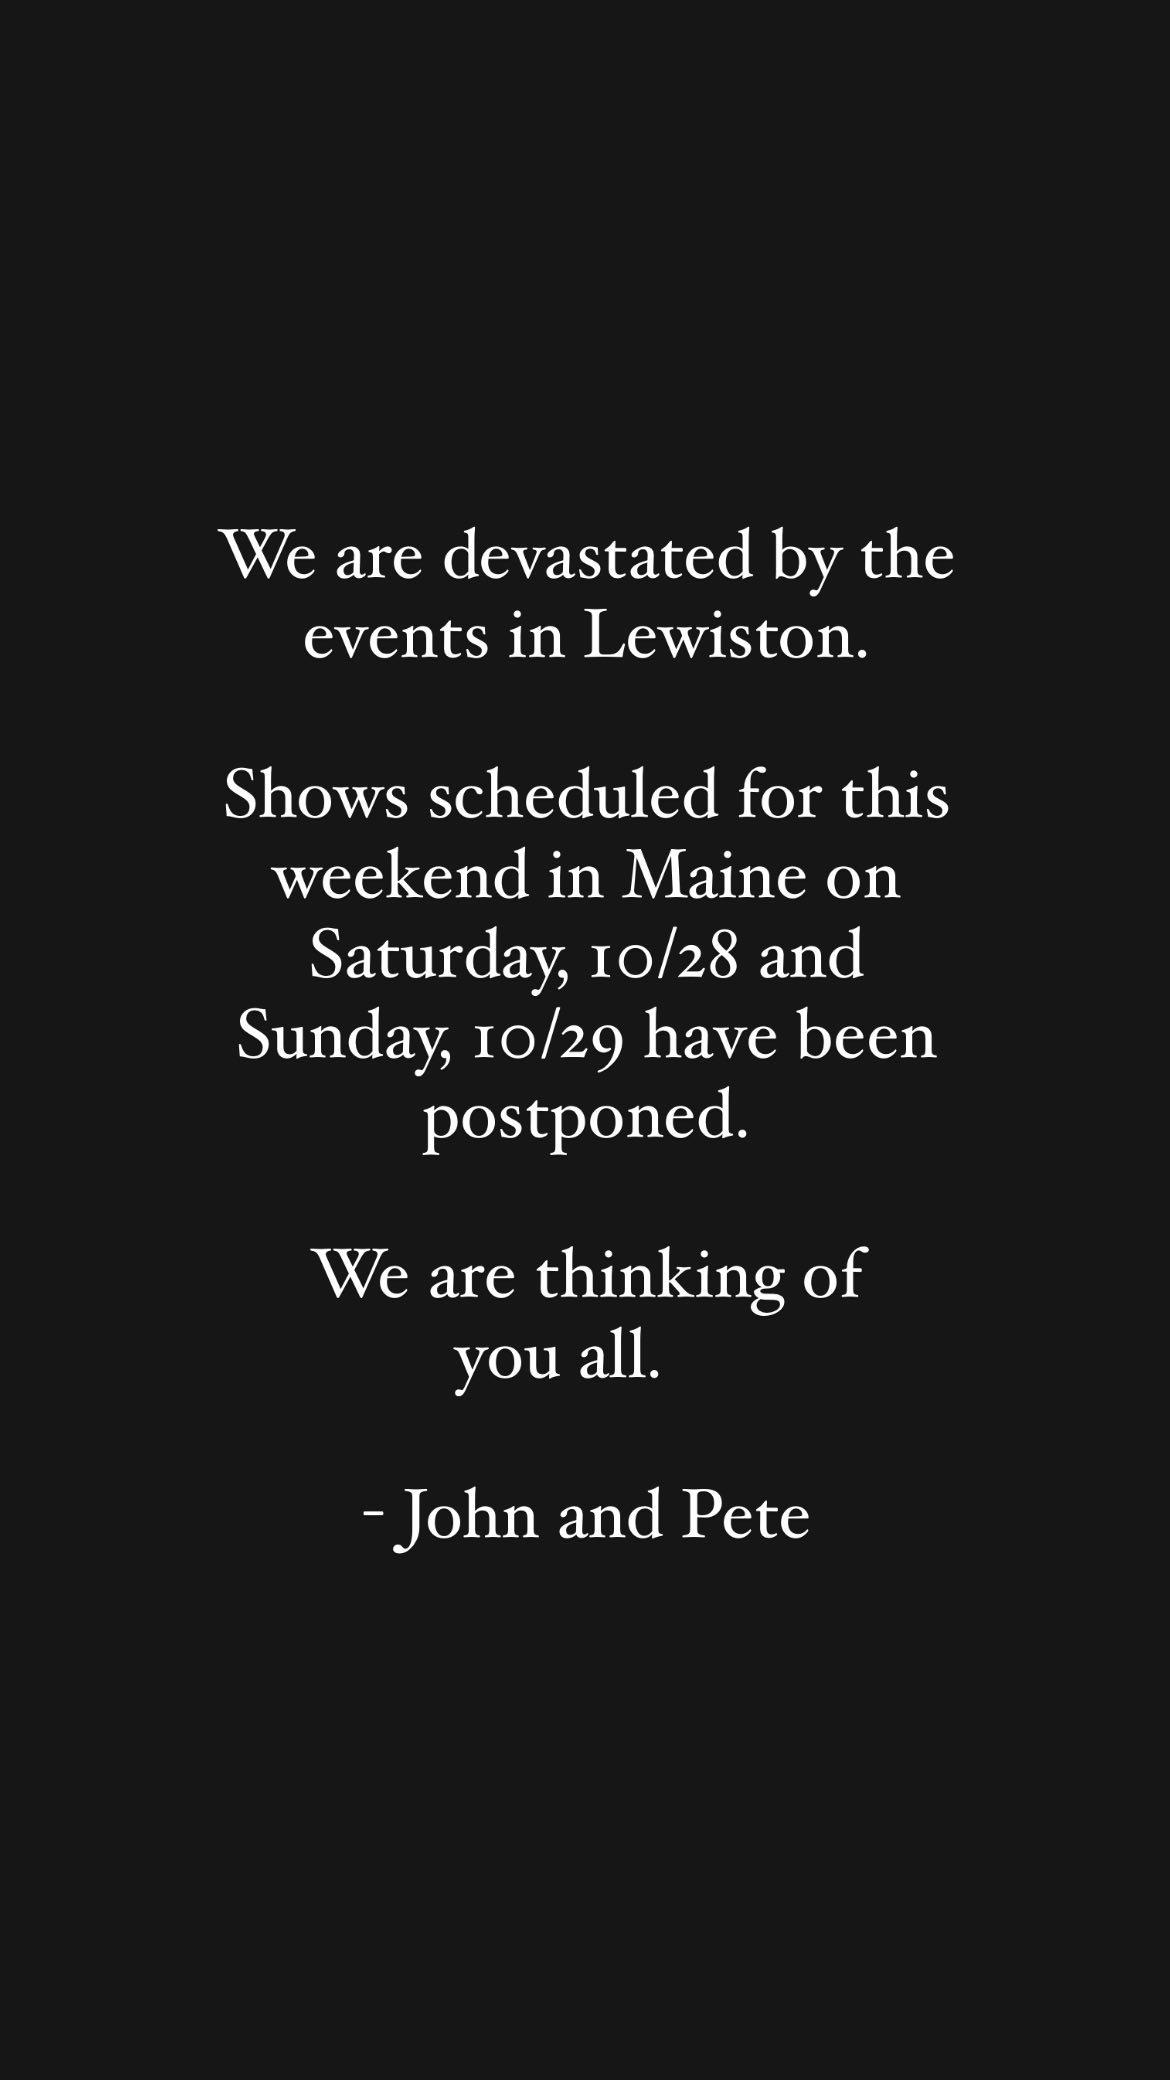 Pete Davidson and John Mulaney Comment On Maine Mass ShootingsIn